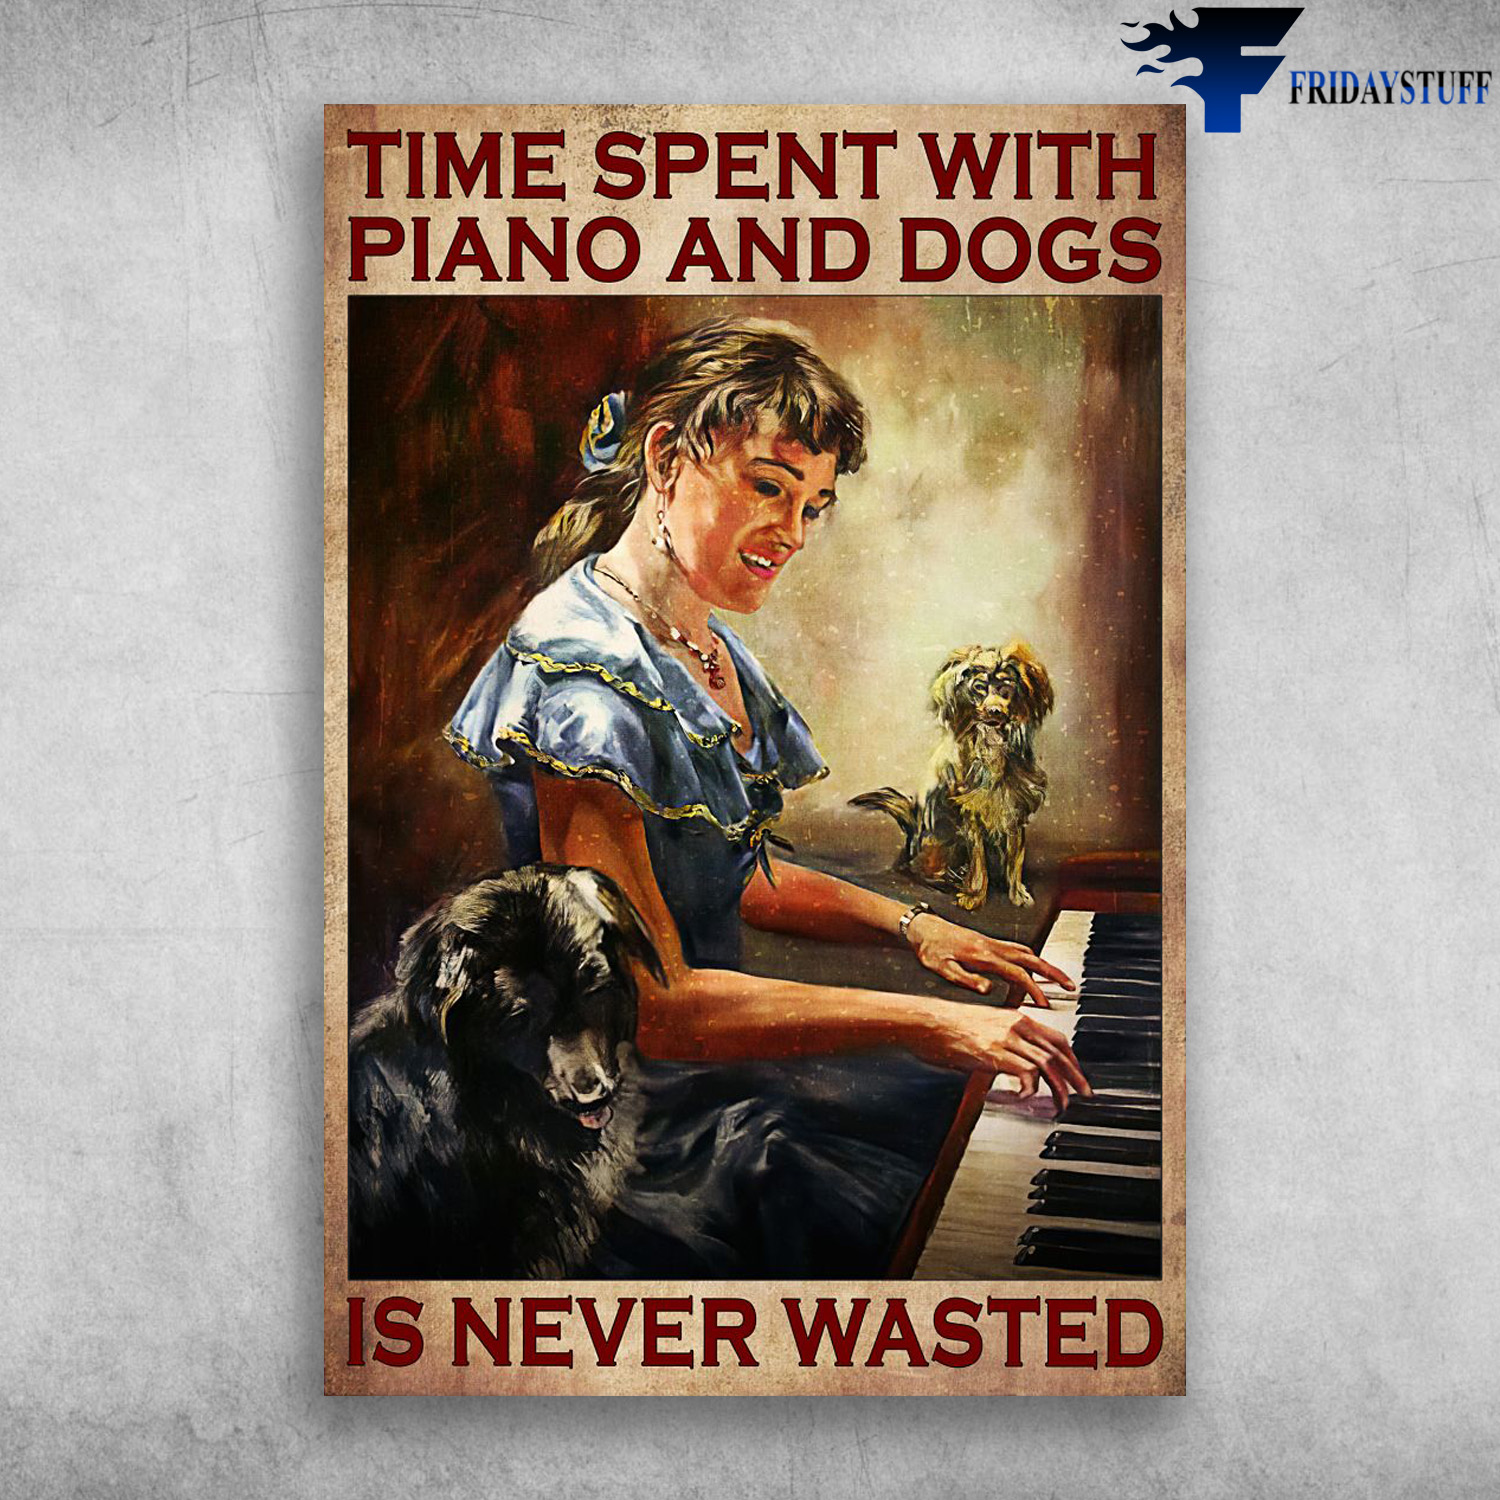 Girl Play Piano With Dog - Time Spent With Piano And Dogs Is Never Wasted